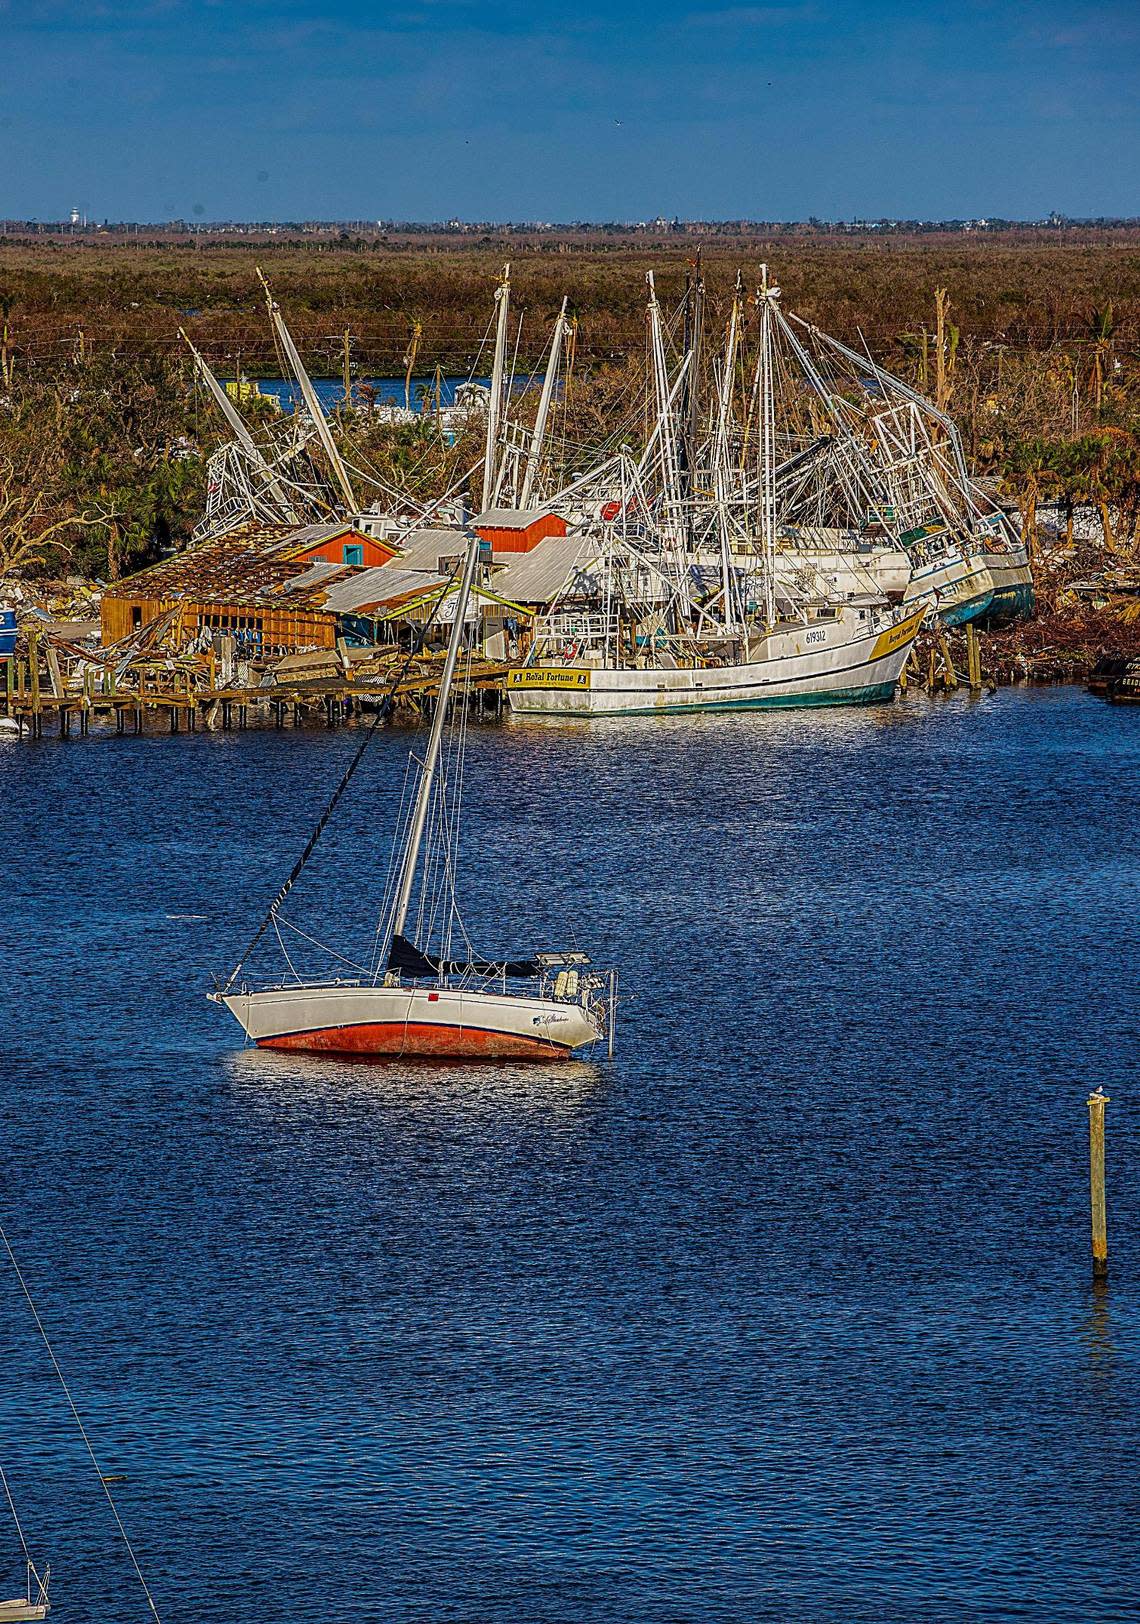 A sailboat lists to its side in Matanzas Harbor in Fort Myers Beach in front of a mass of wrecked shrimping boats Wednesday, Oct. 26, 2022. The damage was caused by Hurricane Ian, with hit the area as a Category 4 storm Wednesday, Sept. 28, 2022. Pedro Portal/pportal@miamiherald.com